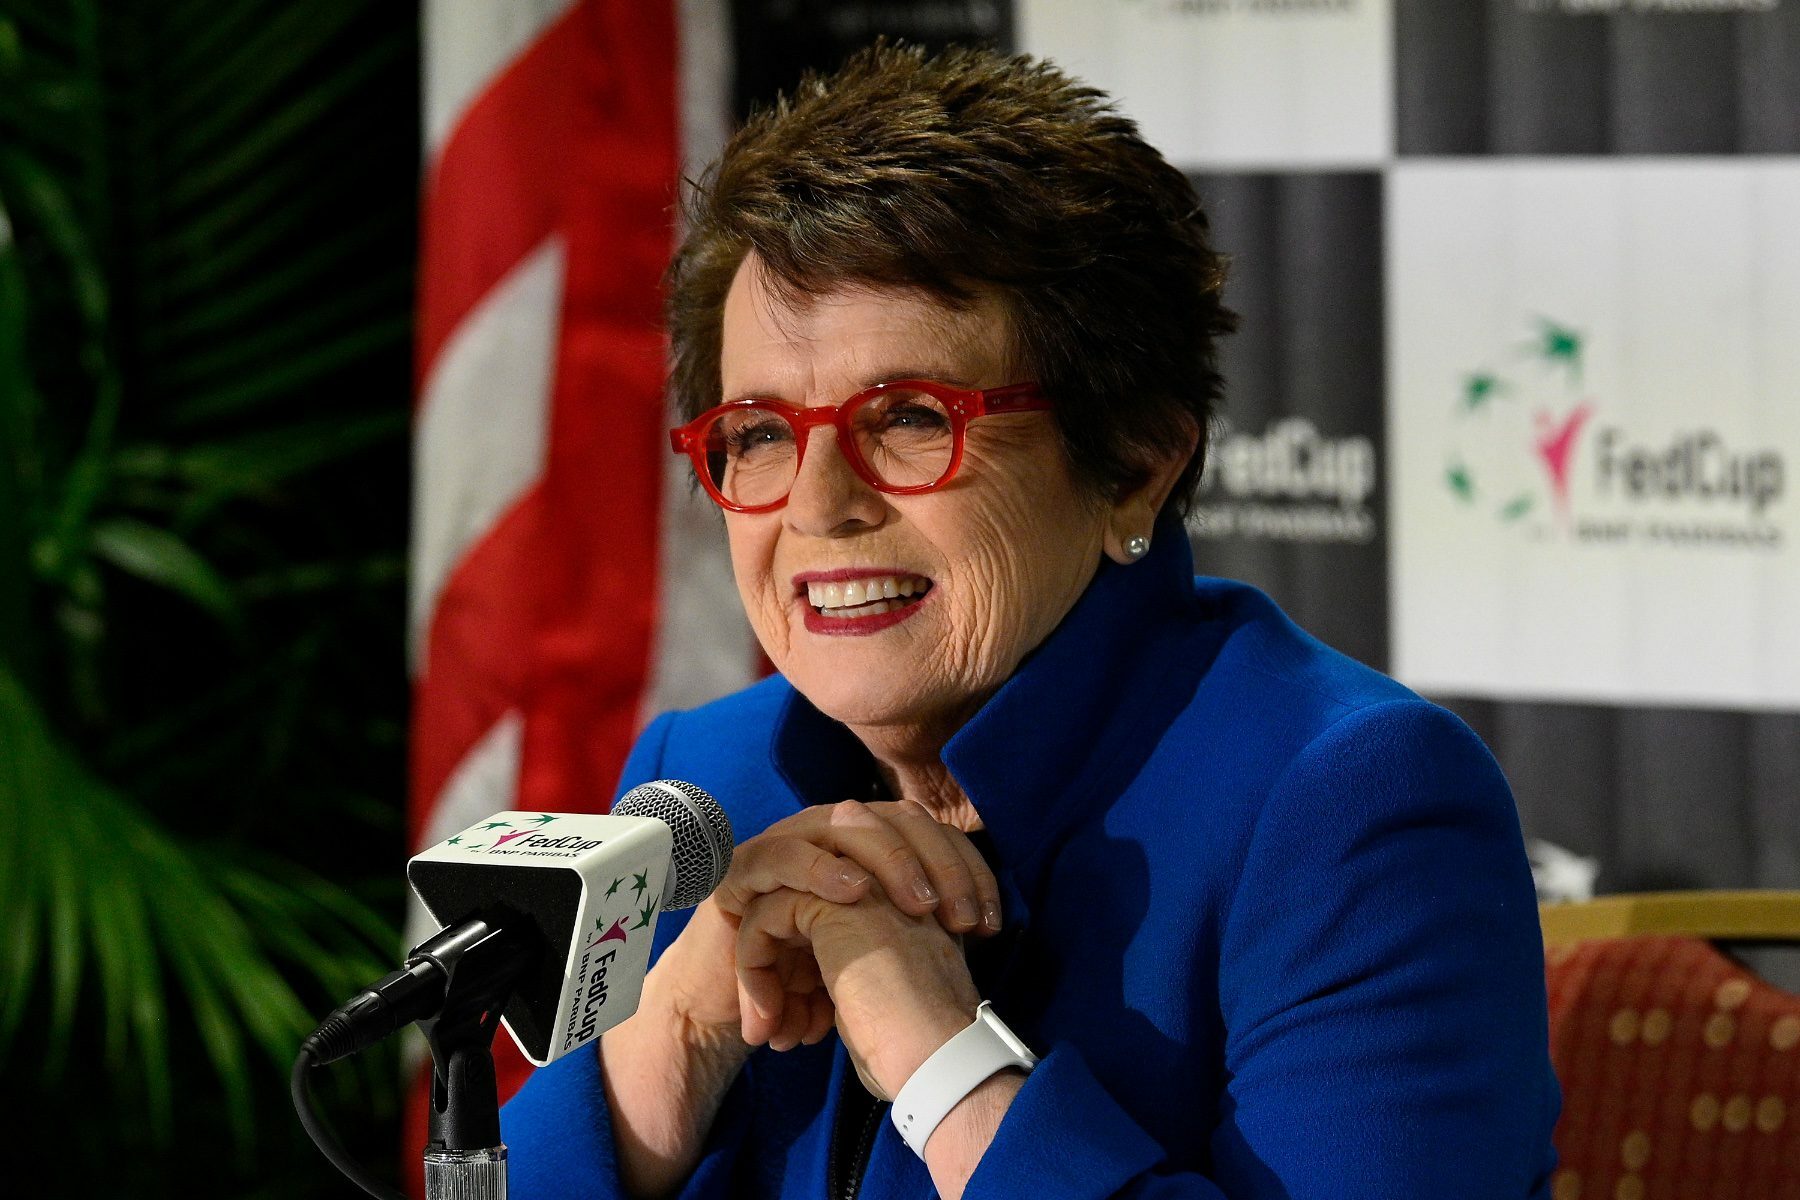 Billie Jean King wants you to be “All In” on your authentic self | The 19th